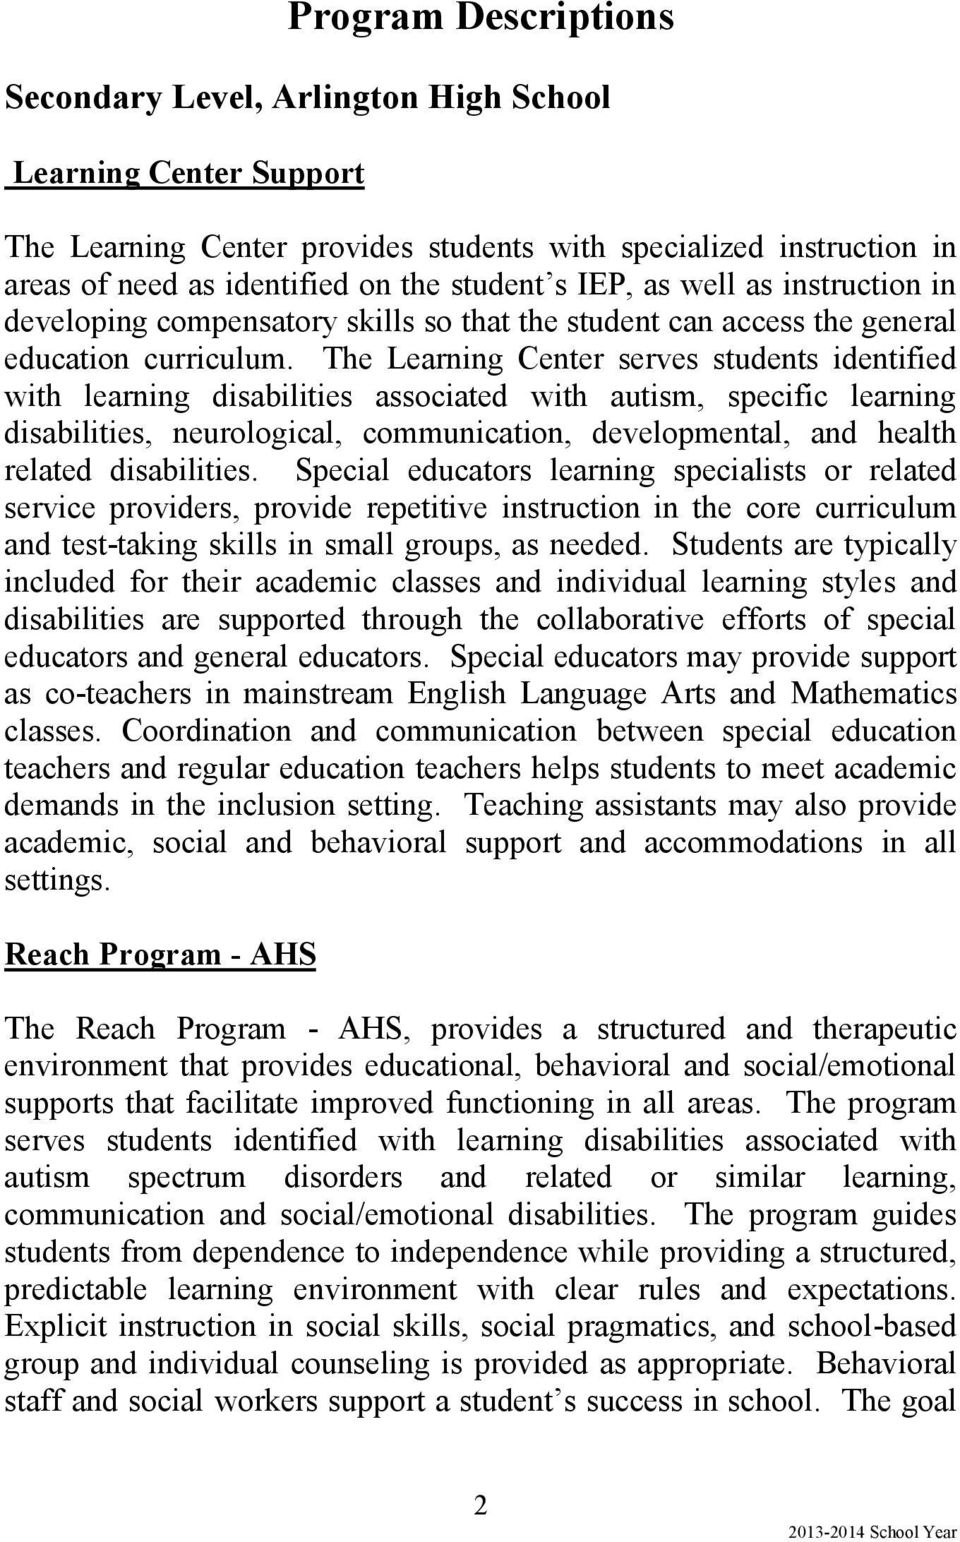 The Learning Center serves students identified with learning disabilities associated with autism, specific learning disabilities, neurological, communication, developmental, and health related